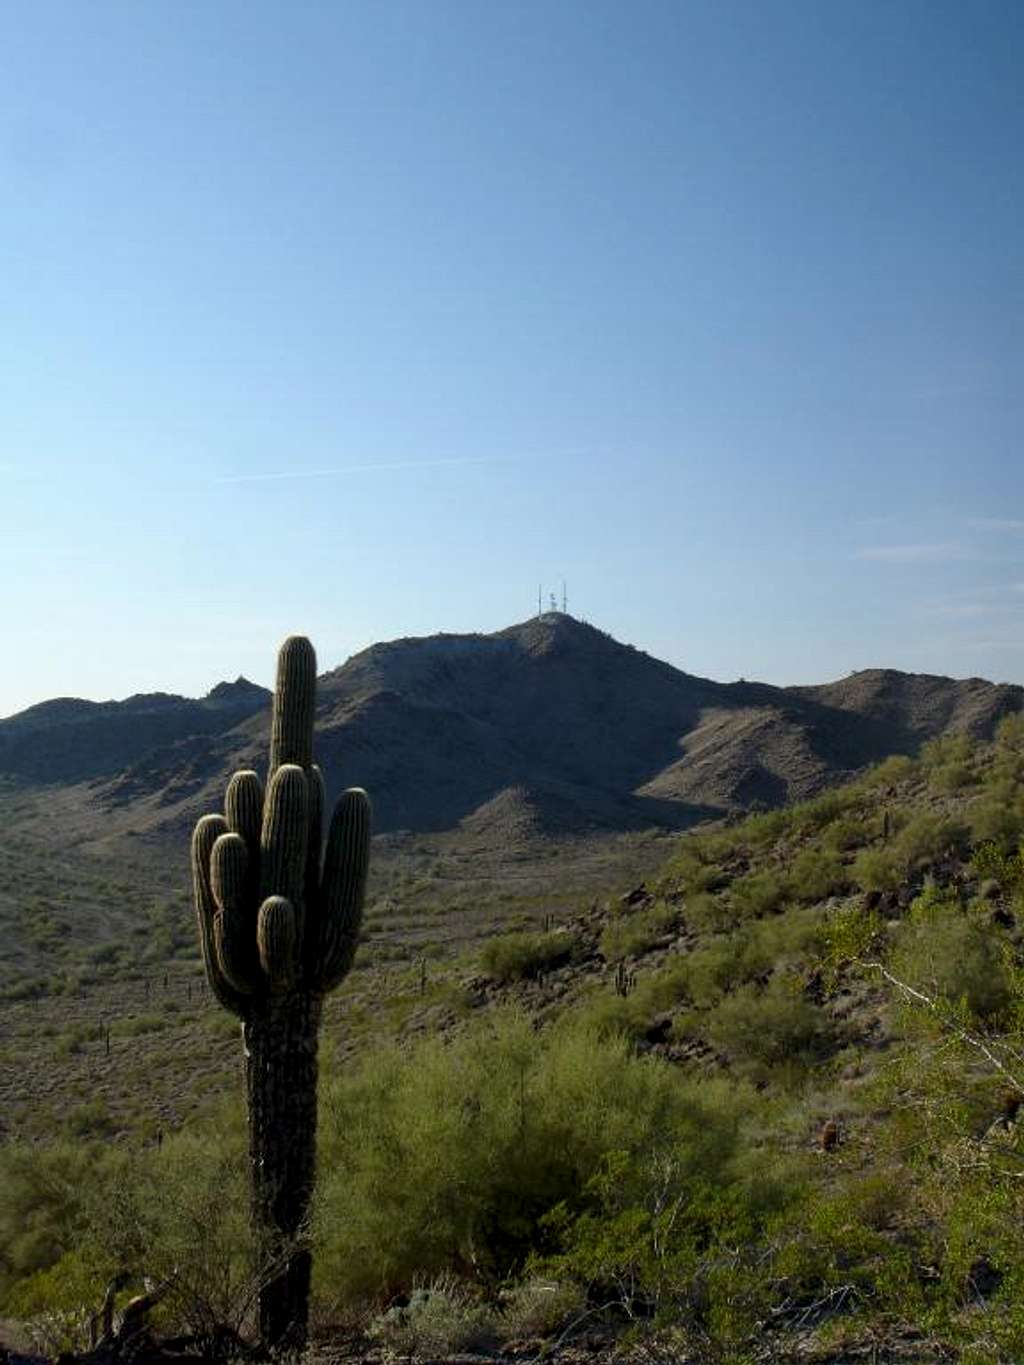 North Mountain framed by a Saguaro cactus